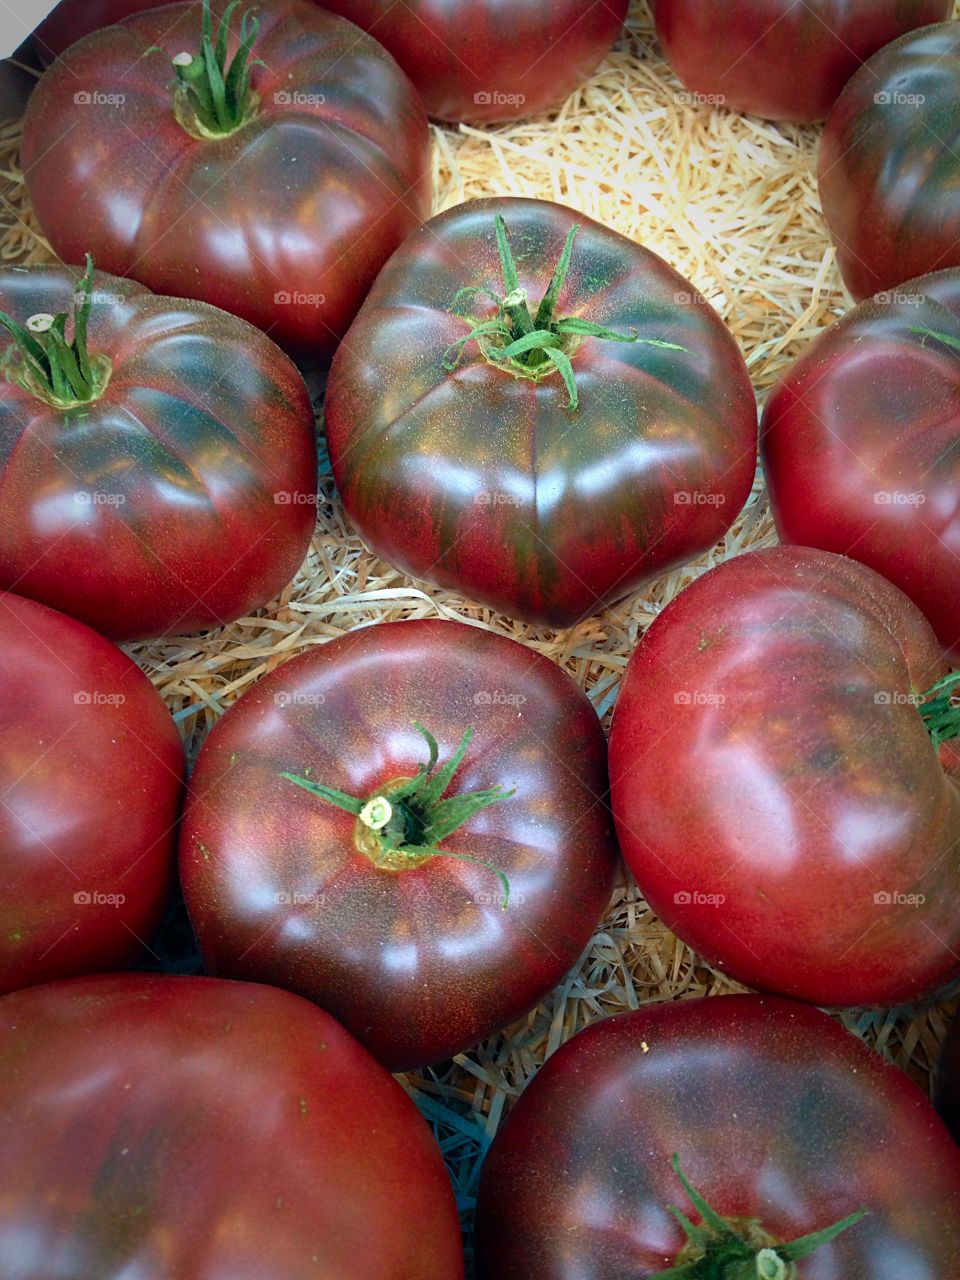 Black ribbed tomatoes on a bed of straw 